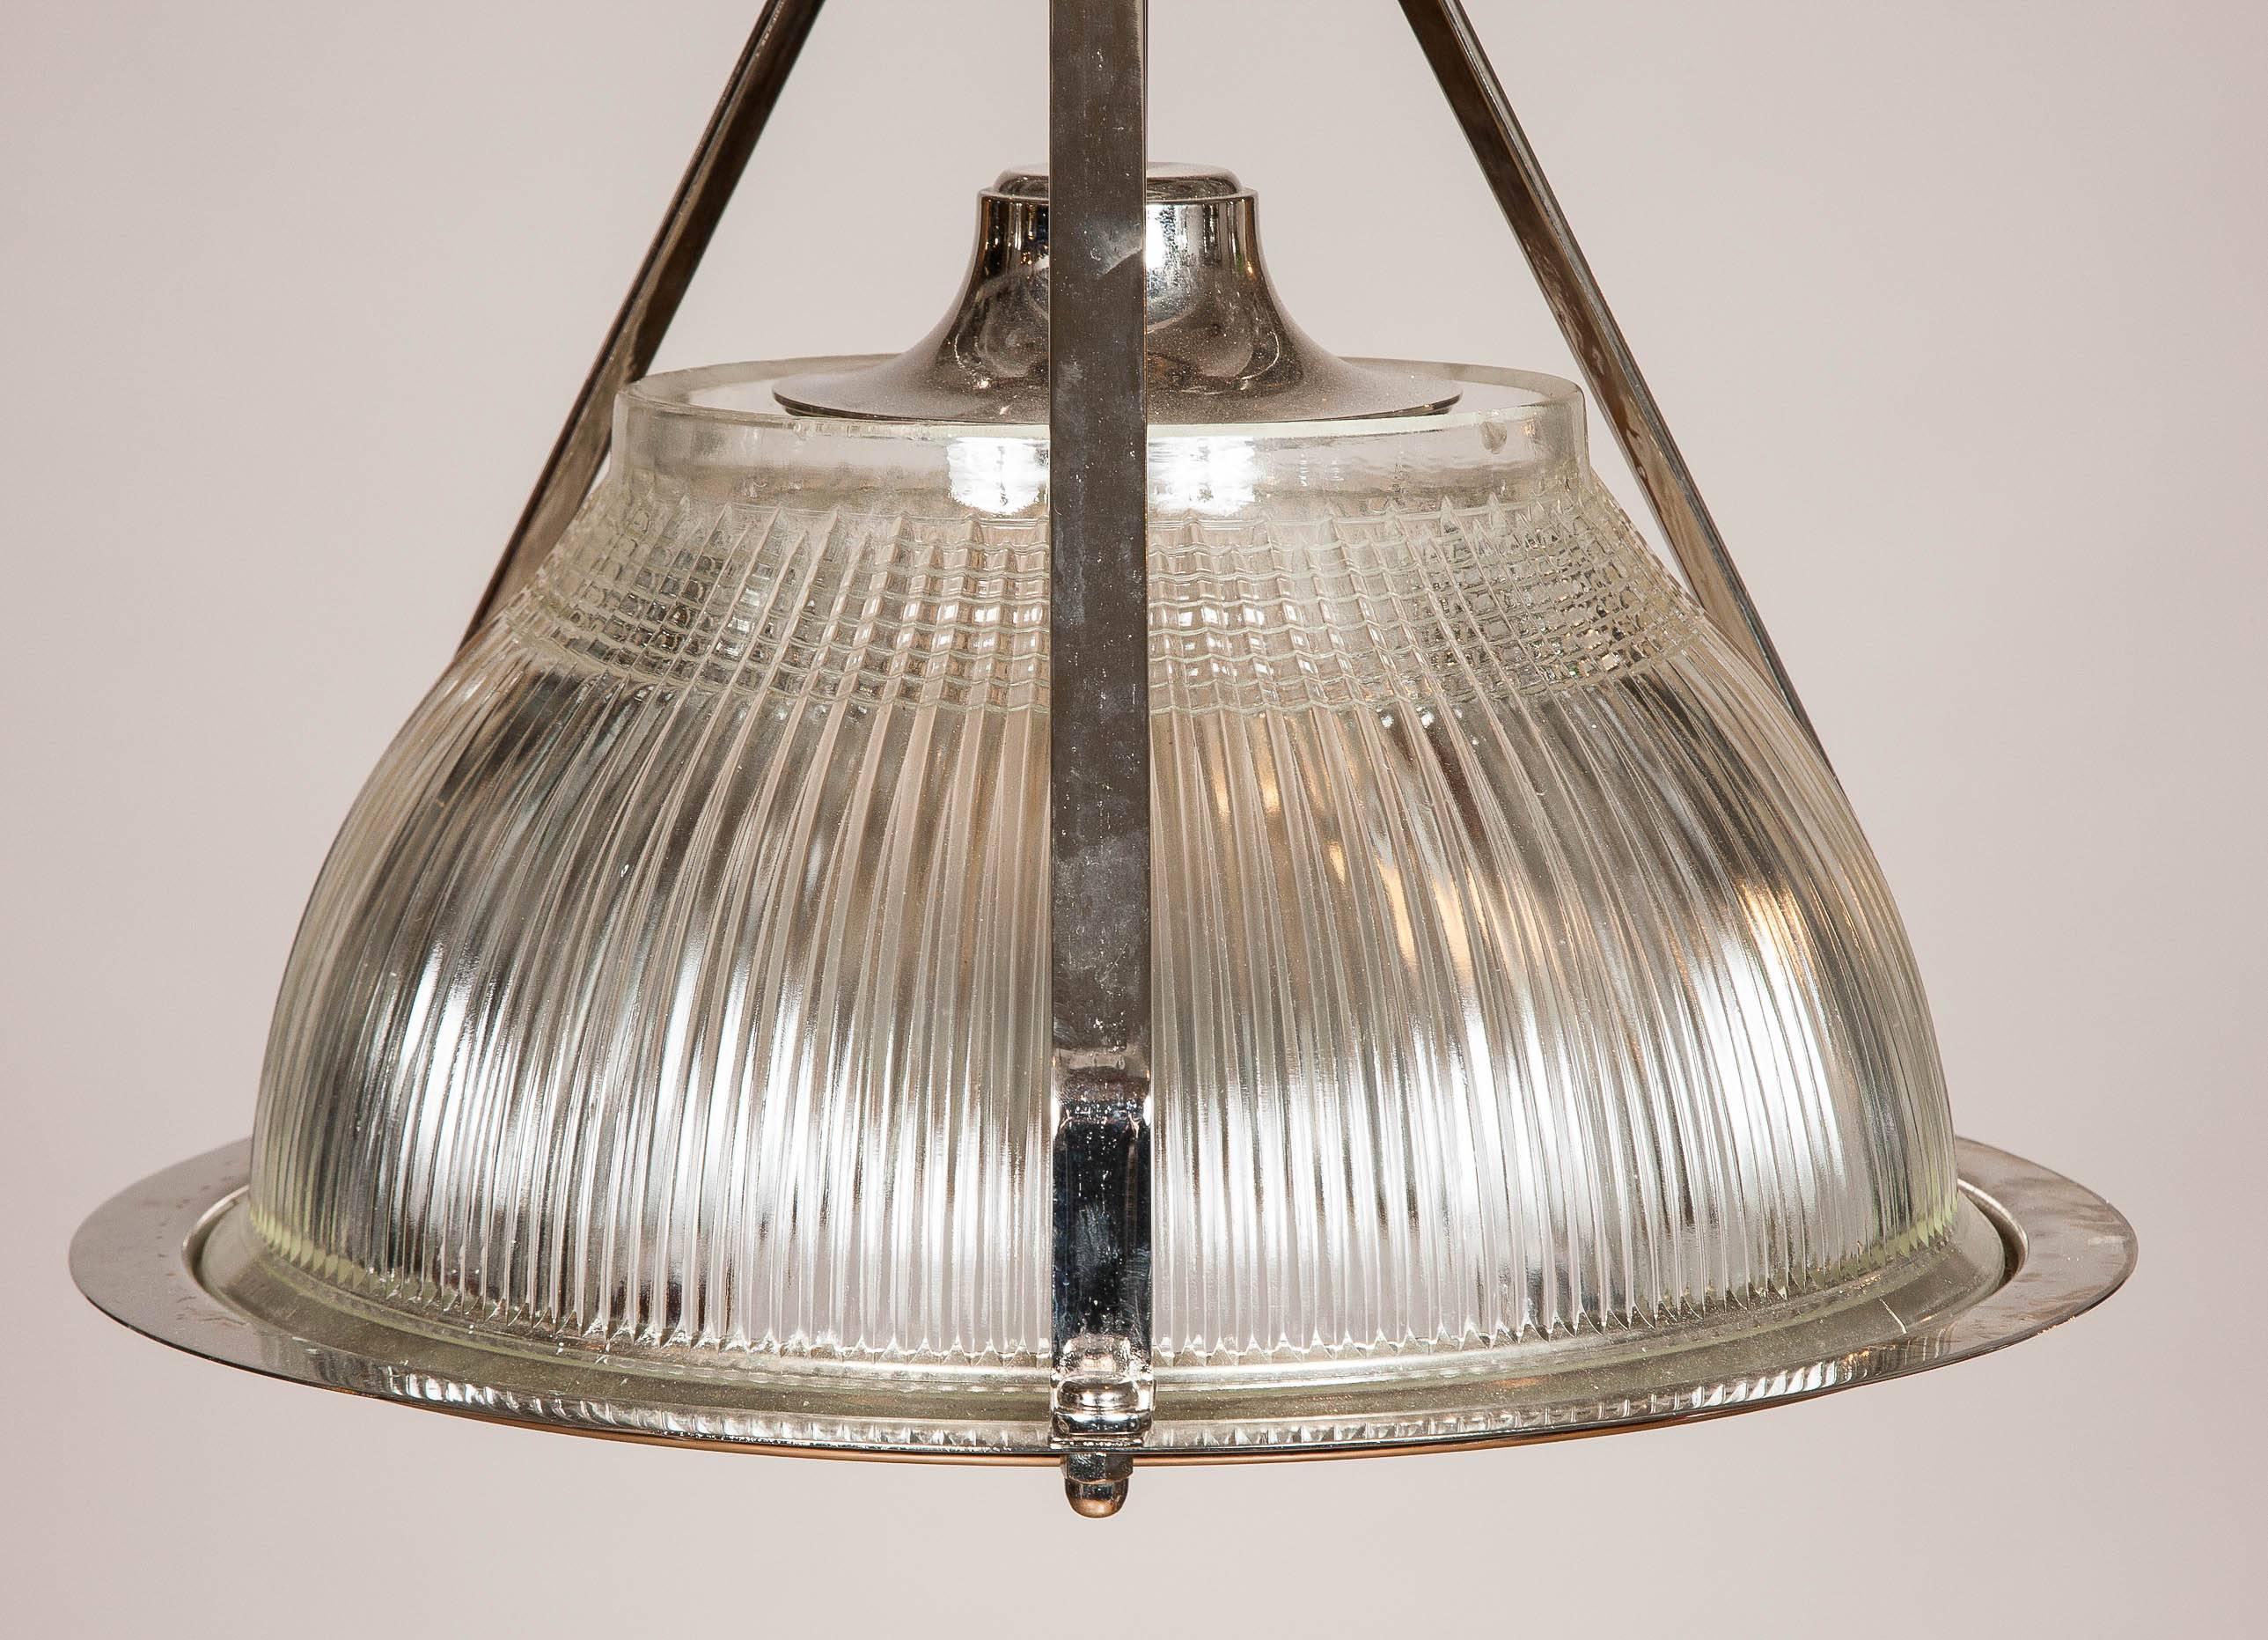 1960s nickel-plated hanging lights formerly used to light aircraft hangers made by Holophane.

Rewired for domestic electricity.

Holophane is a manufacturer of lighting-related products founded in 1898 in London, England. The hallmark of